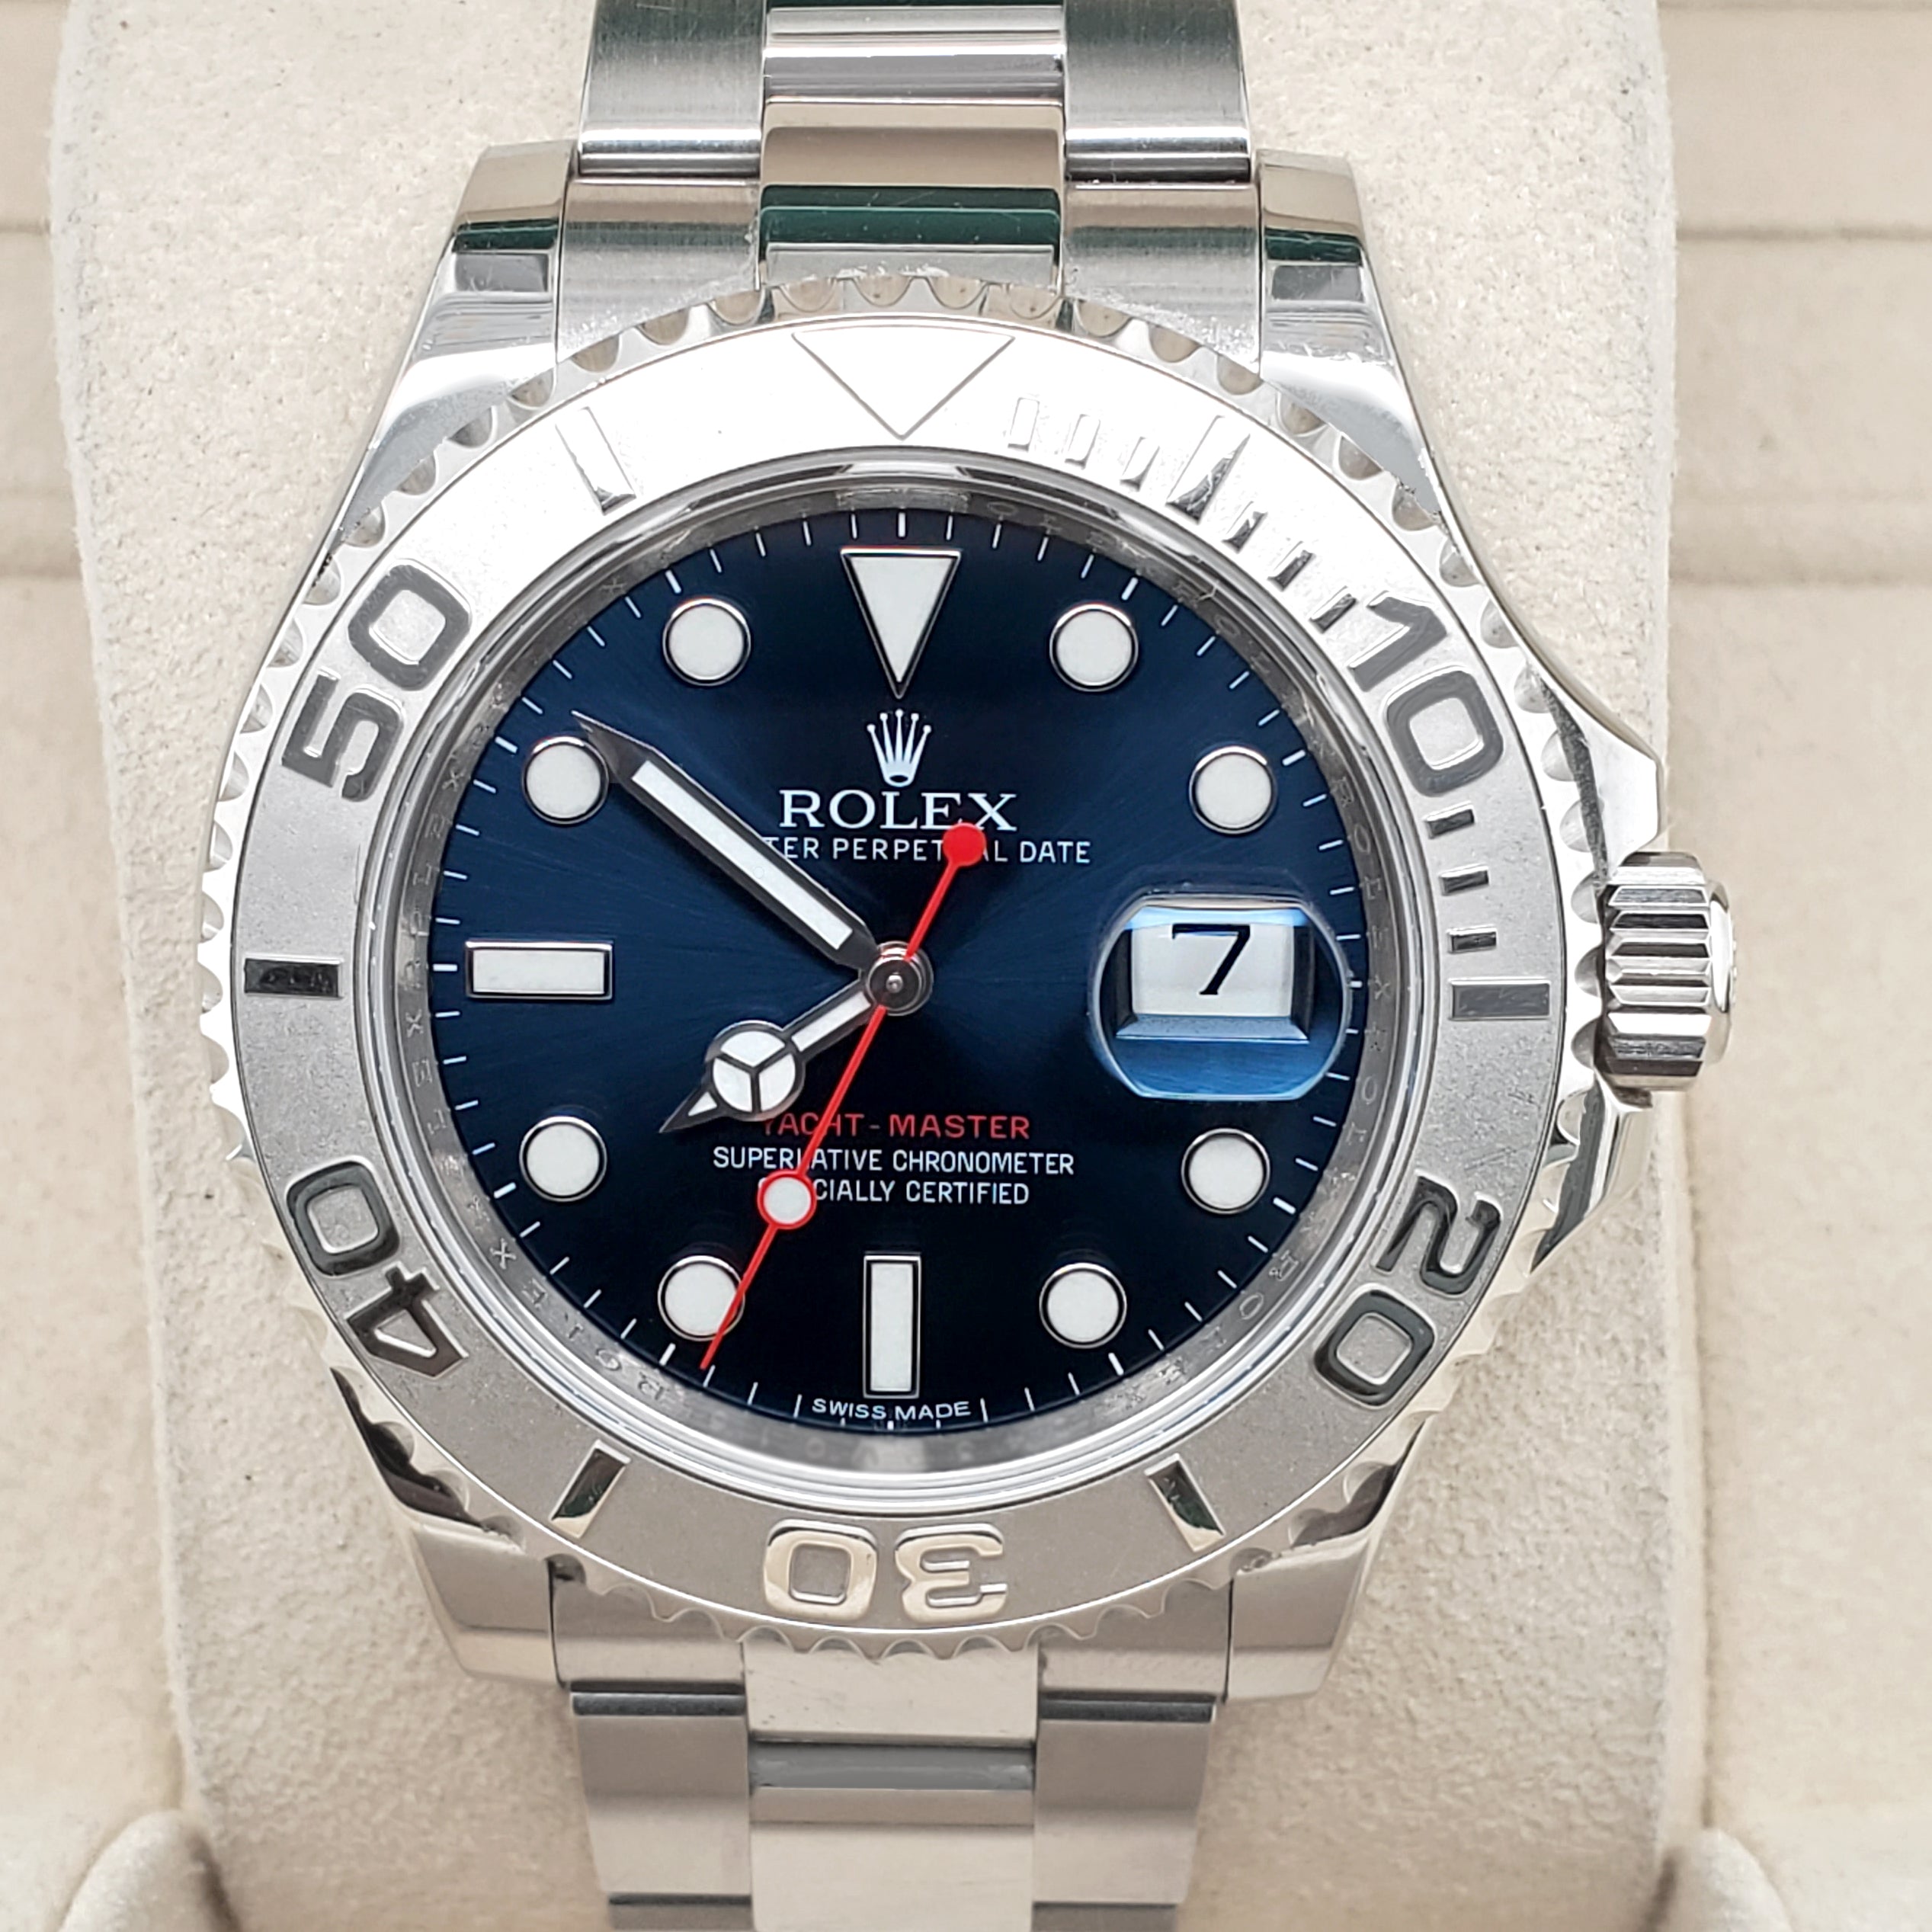 Rolex Yacht-master 40mm - The Rolex you can actually buy! 